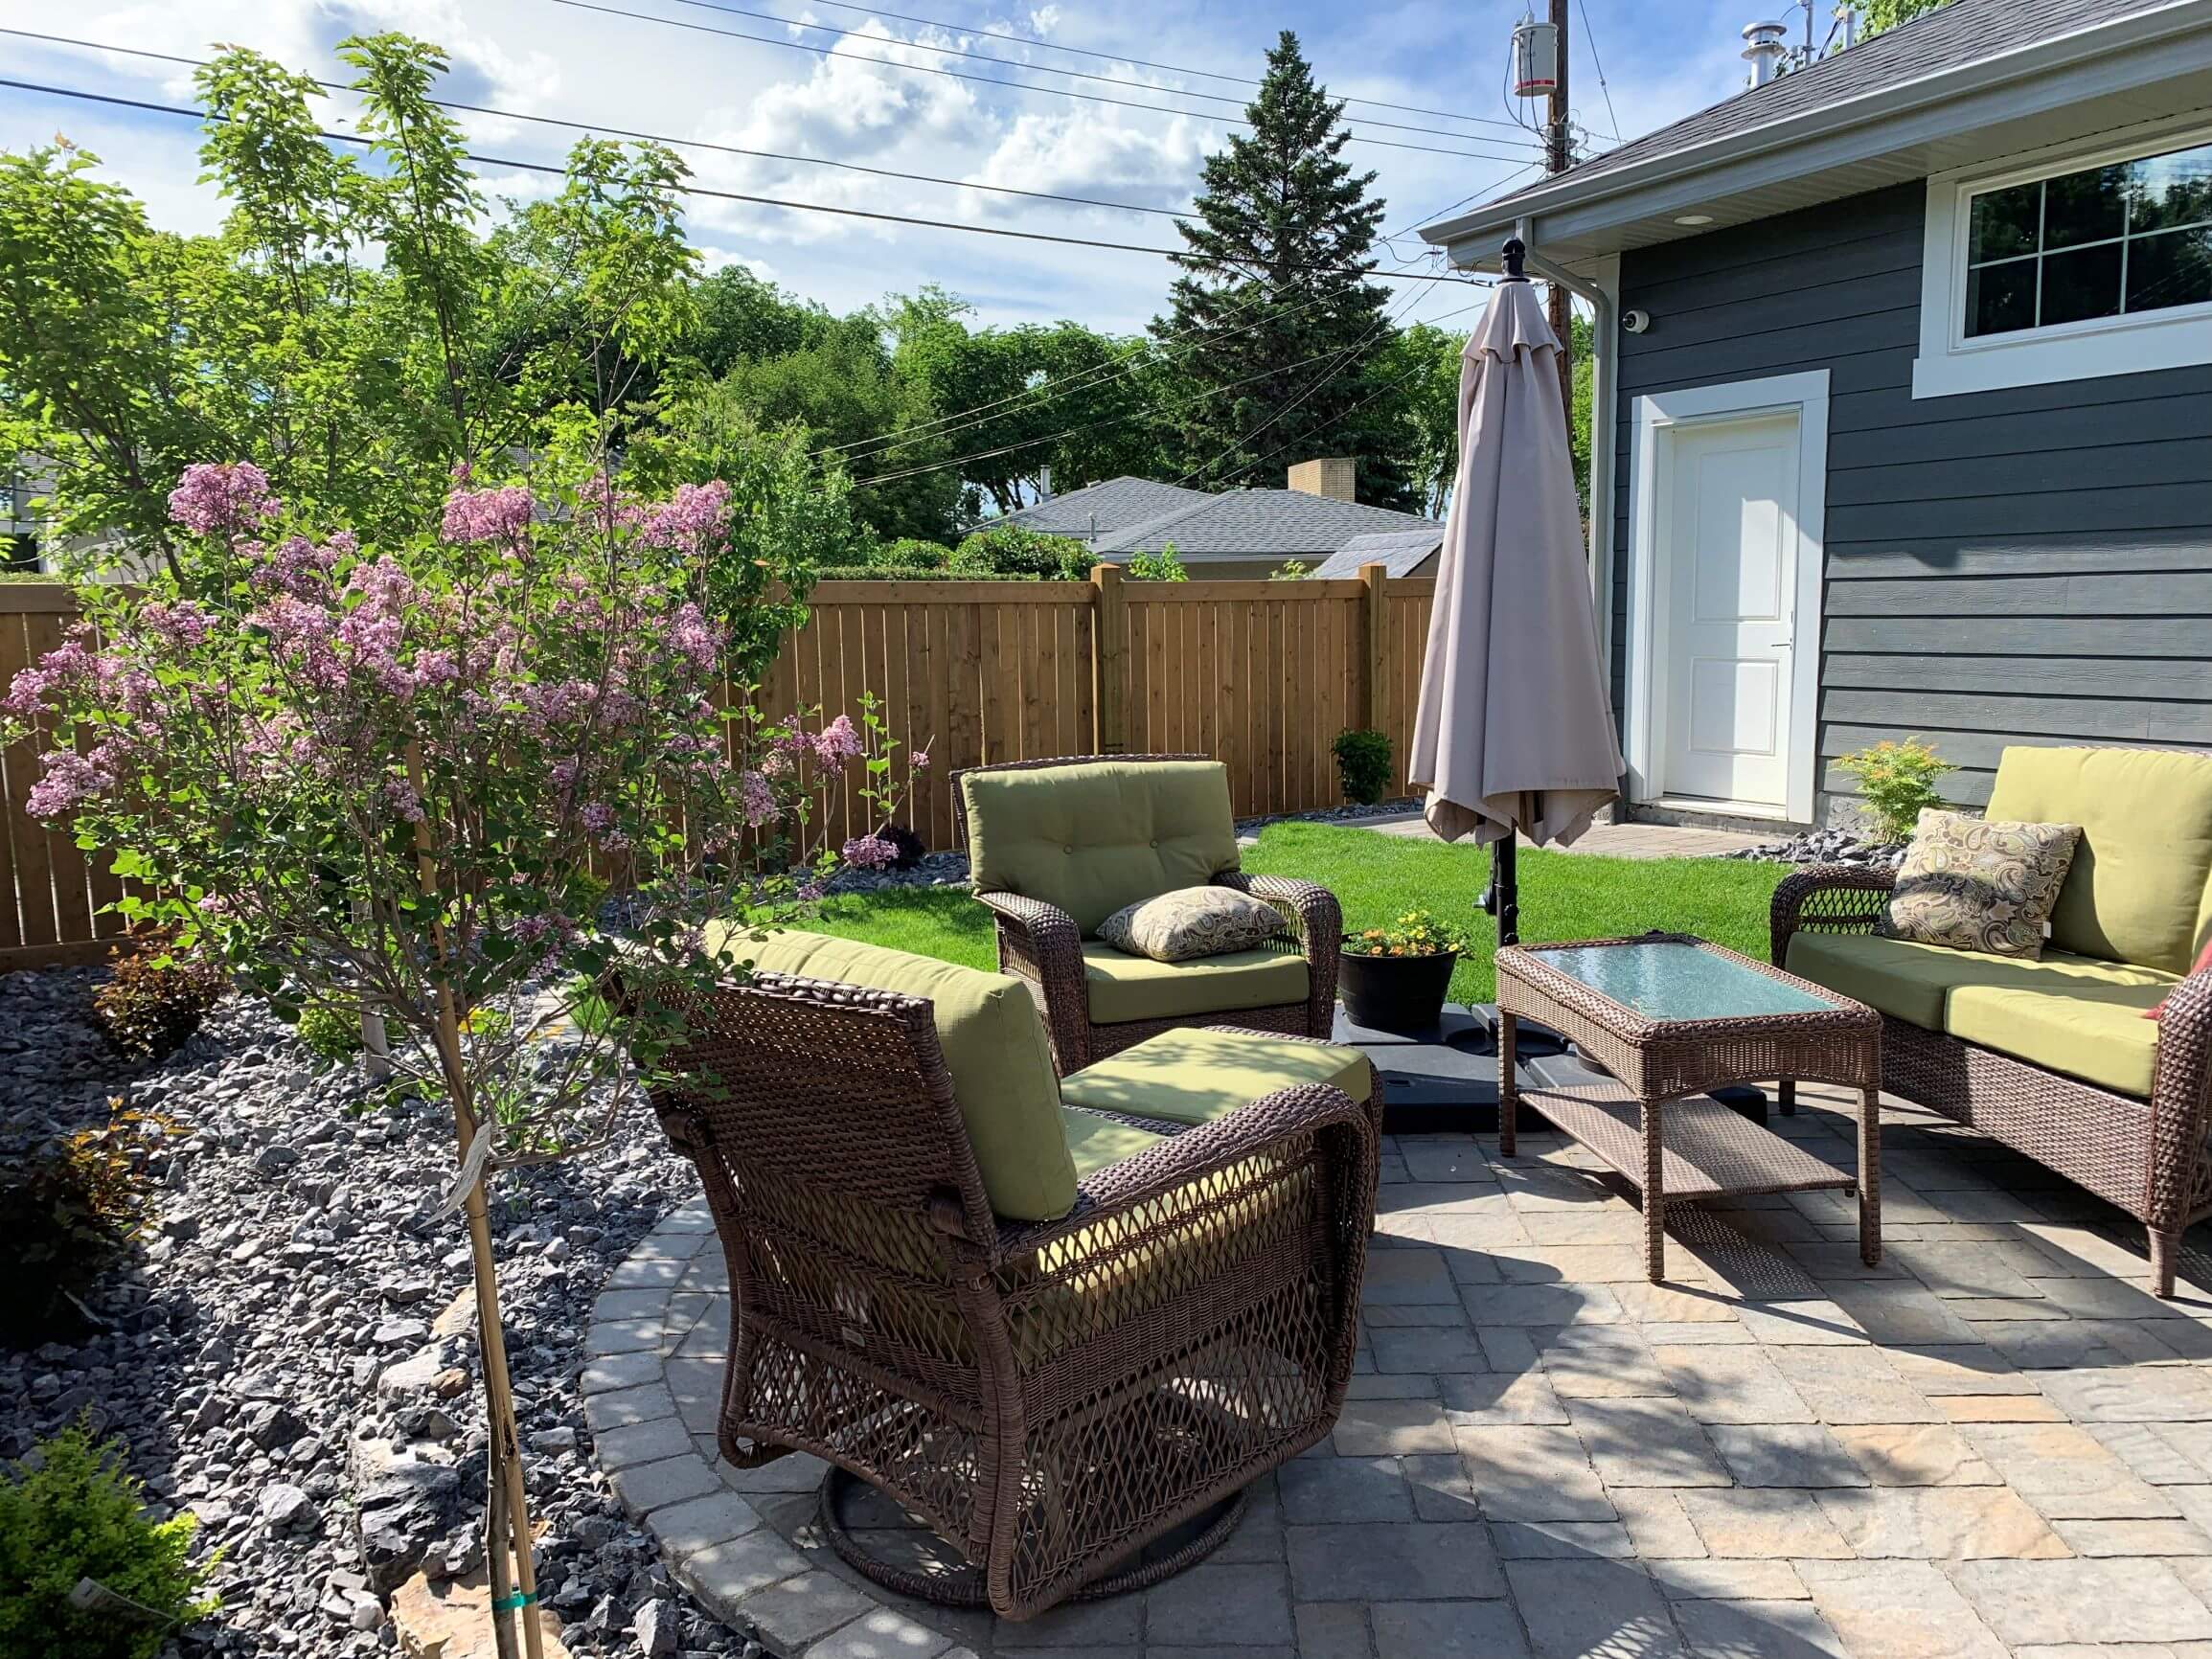 Outdoor living space landscaped by Isle Group